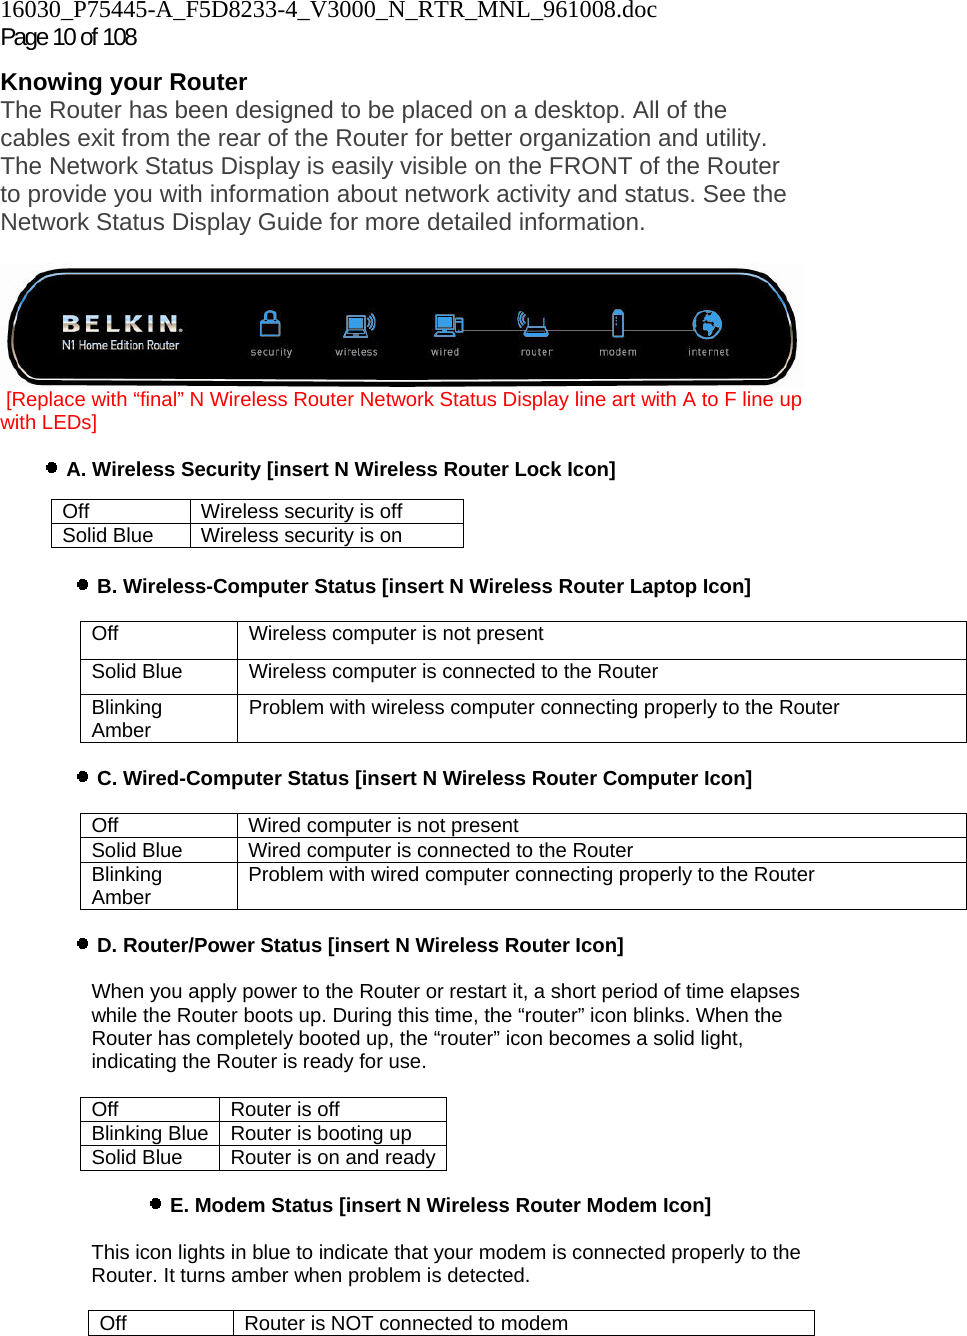 16030_P75445-A_F5D8233-4_V3000_N_RTR_MNL_961008.doc Page 10 of 108 Knowing your Router The Router has been designed to be placed on a desktop. All of the cables exit from the rear of the Router for better organization and utility. The Network Status Display is easily visible on the FRONT of the Router to provide you with information about network activity and status. See the Network Status Display Guide for more detailed information.    [Replace with “final” N Wireless Router Network Status Display line art with A to F line up with LEDs]    A. Wireless Security [insert N Wireless Router Lock Icon]        B. Wireless-Computer Status [insert N Wireless Router Laptop Icon]   Off  Wireless computer is not present Solid Blue  Wireless computer is connected to the Router Blinking Amber  Problem with wireless computer connecting properly to the Router      C. Wired-Computer Status [insert N Wireless Router Computer Icon]   Off  Wired computer is not present Solid Blue  Wired computer is connected to the Router Blinking Amber  Problem with wired computer connecting properly to the Router      D. Router/Power Status [insert N Wireless Router Icon]   When you apply power to the Router or restart it, a short period of time elapses while the Router boots up. During this time, the “router” icon blinks. When the Router has completely booted up, the “router” icon becomes a solid light, indicating the Router is ready for use.  Off Router is off Blinking Blue  Router is booting up Solid Blue  Router is on and ready     E. Modem Status [insert N Wireless Router Modem Icon]   This icon lights in blue to indicate that your modem is connected properly to the Router. It turns amber when problem is detected.  Off  Router is NOT connected to modem  Off Wireless security is off Solid Blue  Wireless security is on 